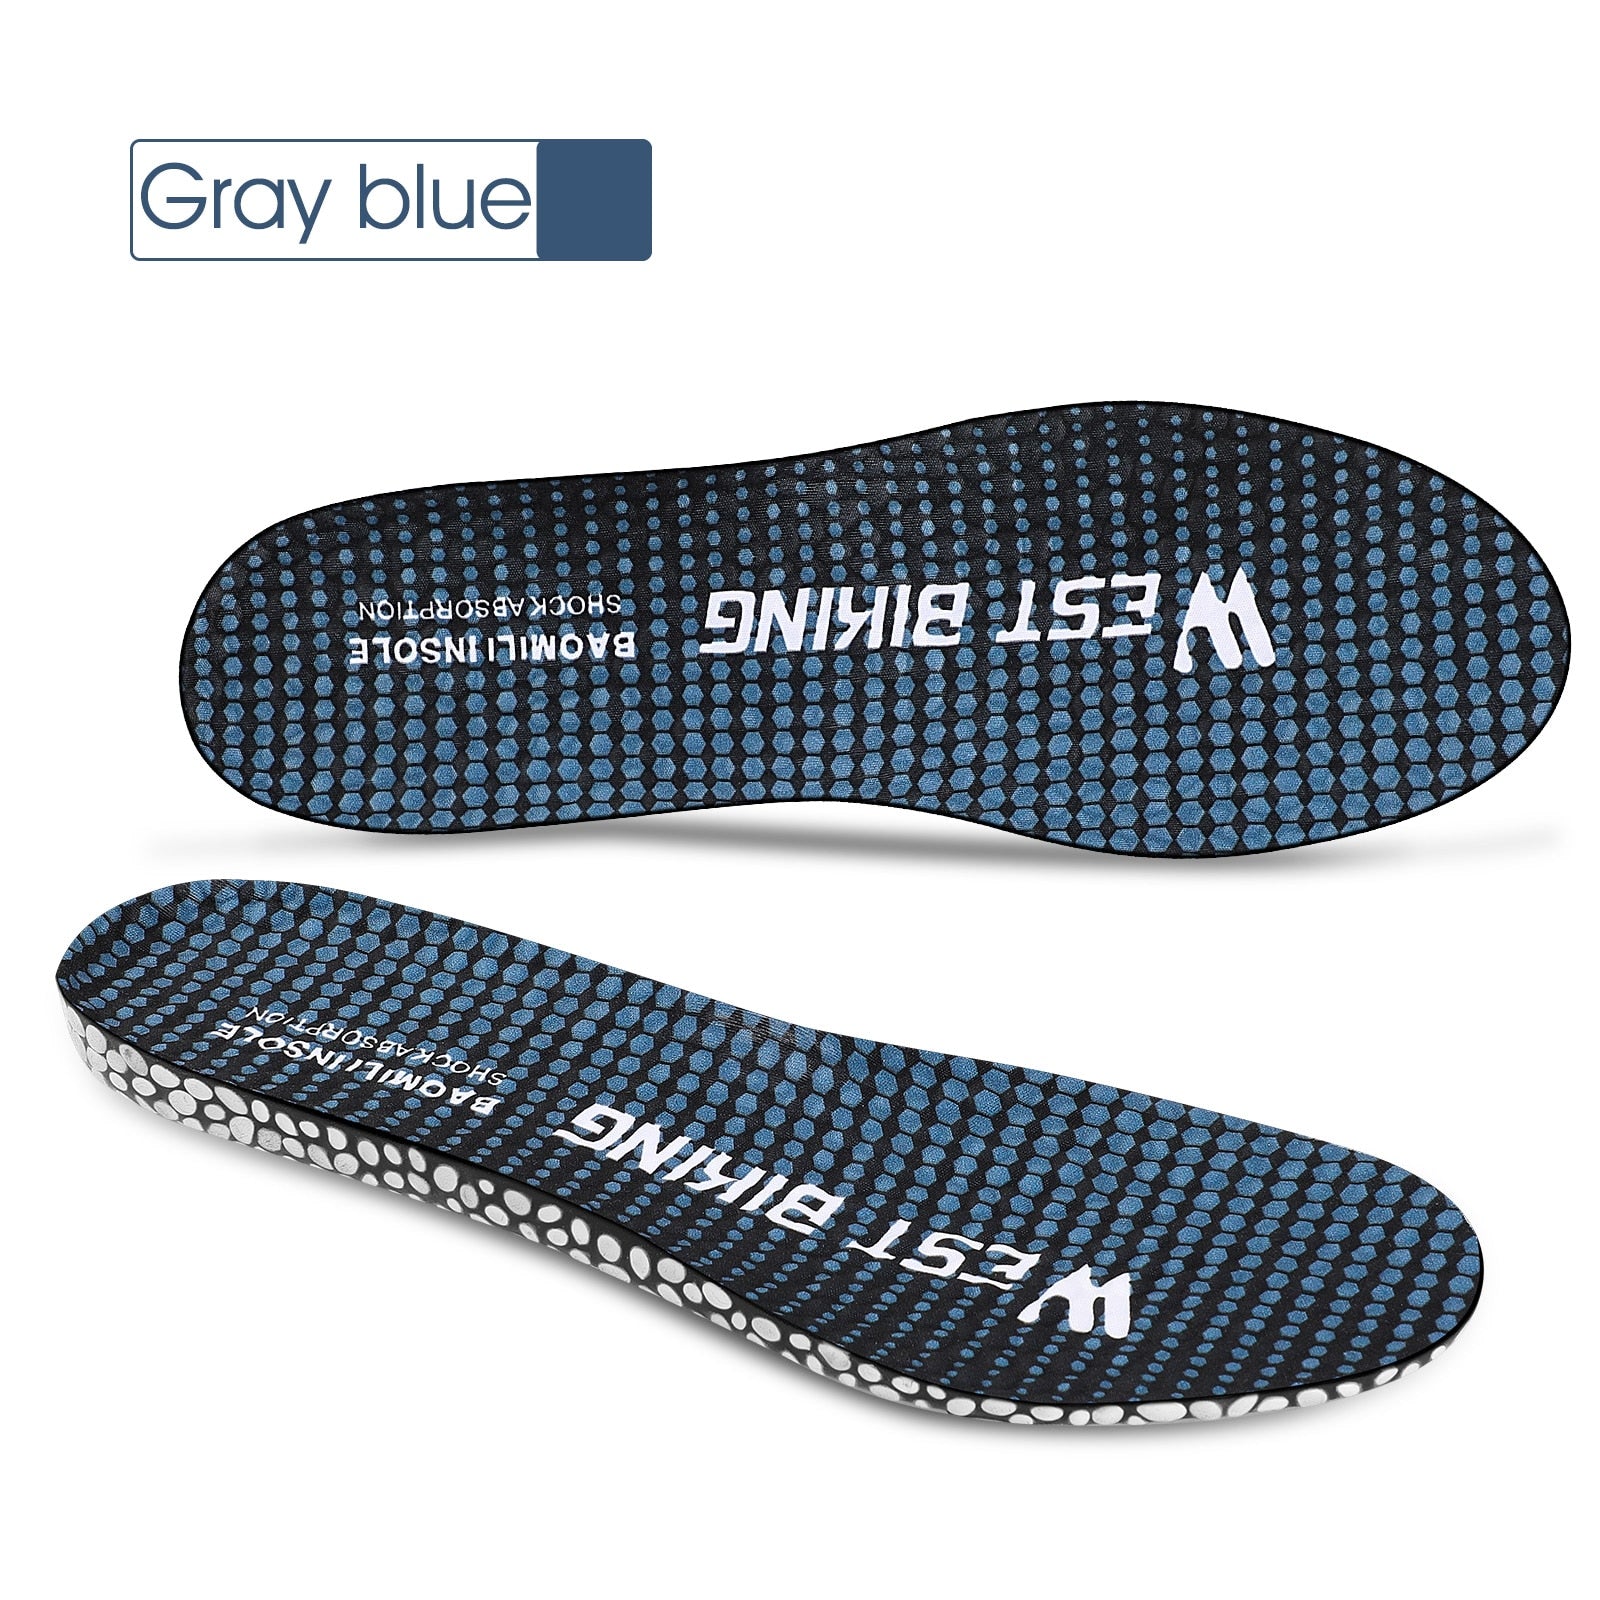 Memory Foam Sports Insoles: Absorb-Sweat, Breathable Cushioning for Cycling and Running Shoes BIKE FIELD